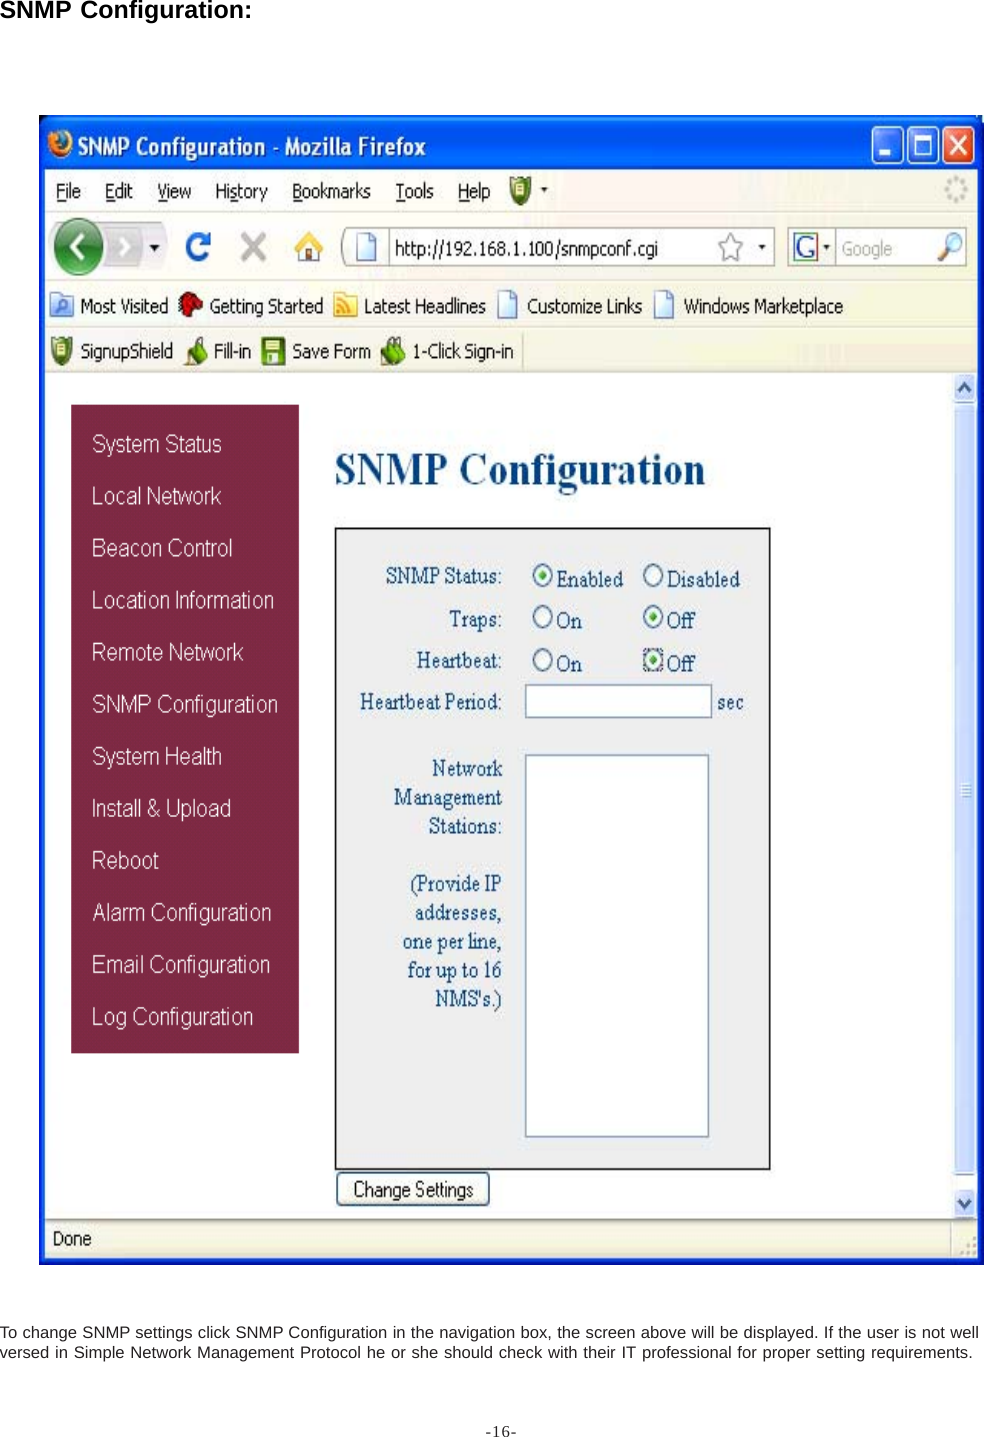 -16-To change SNMP settings click SNMP Configuration in the navigation box, the screen above will be displayed. If the user is not wellversed in Simple Network Management Protocol he or she should check with their IT professional for proper setting requirements.SNMP Configuration: